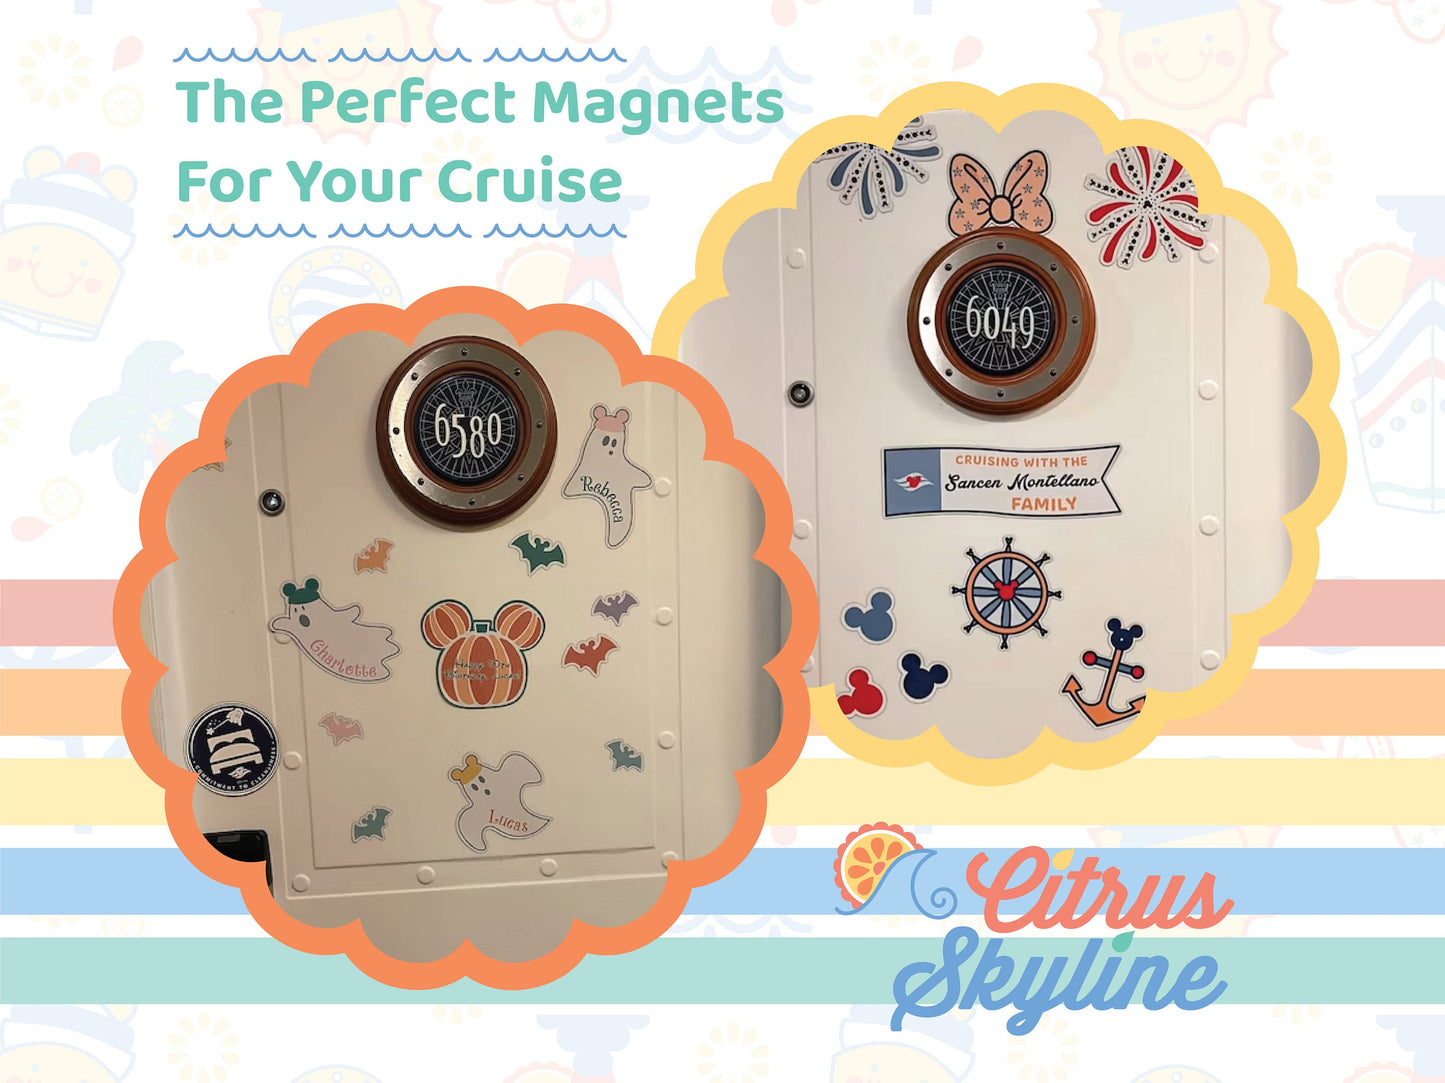 Cinderella Cruise Magnet Theme for Happy Celebrations Includes Castle, Custom Name Magnets, Family Happily Ever After, Pumpkin Carriage